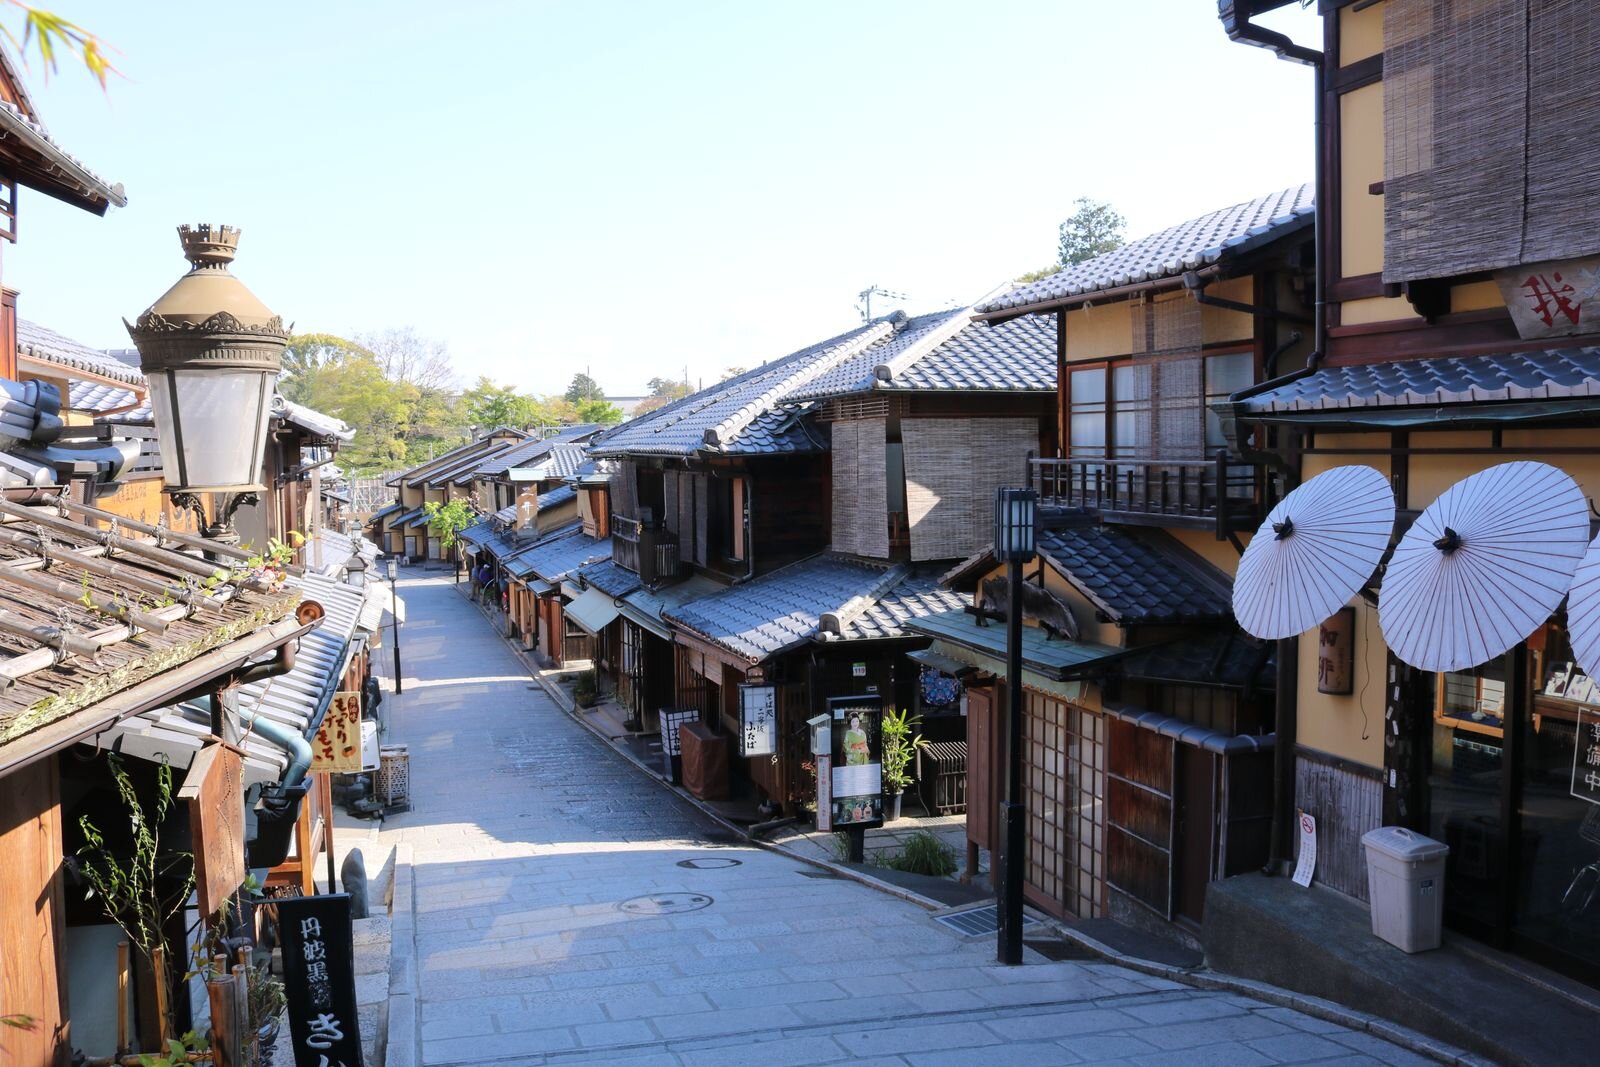 An empty street with many wooden traditional Japanese buildings in Gion historic district